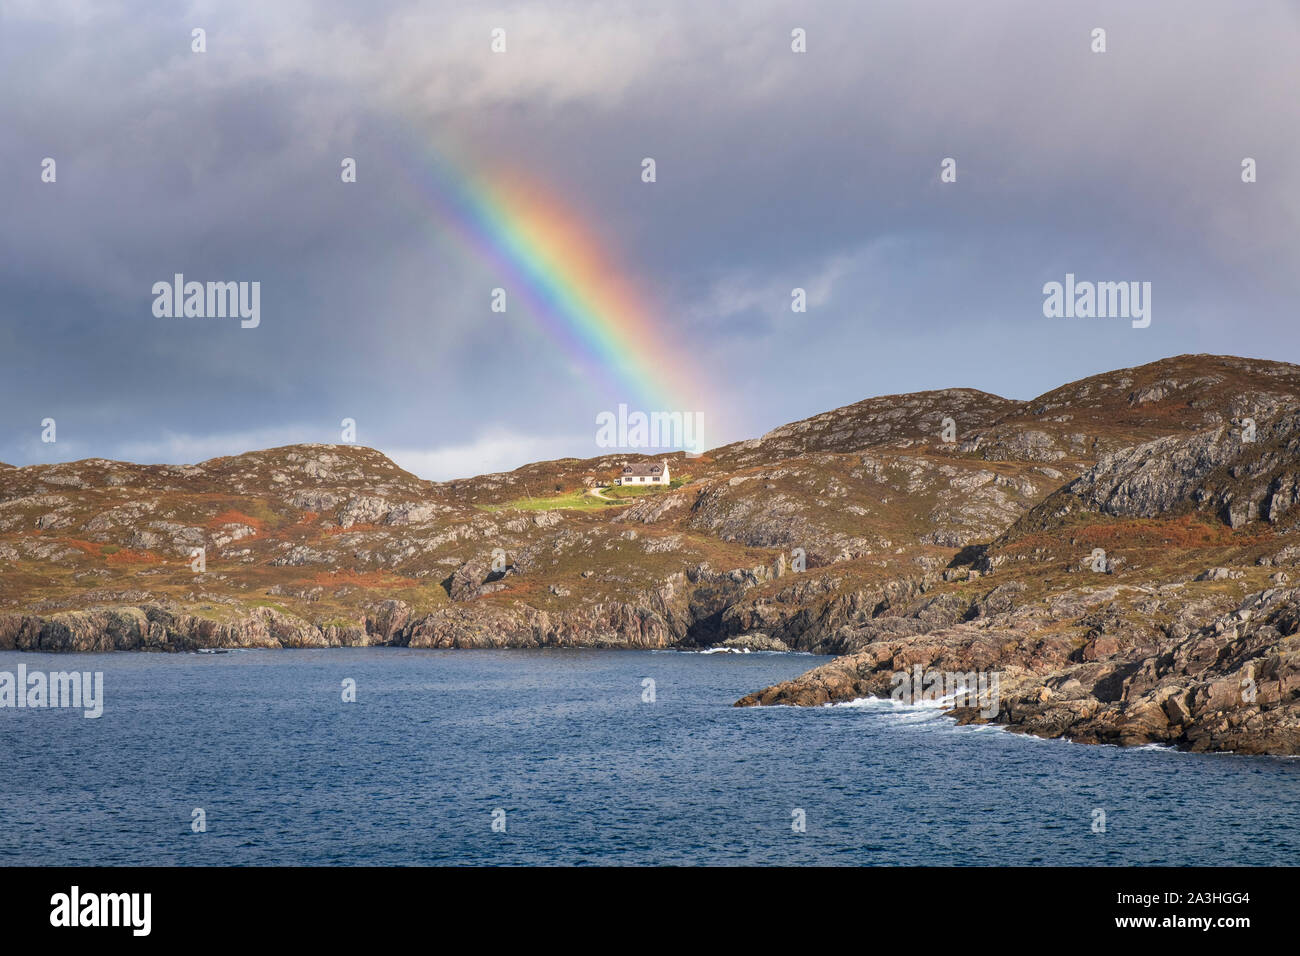 A home on the coast somewhere over the rainbow a lone cottage or house by the sea on a remote barren coastline with dark cloudy sky and bright rainbow Stock Photo